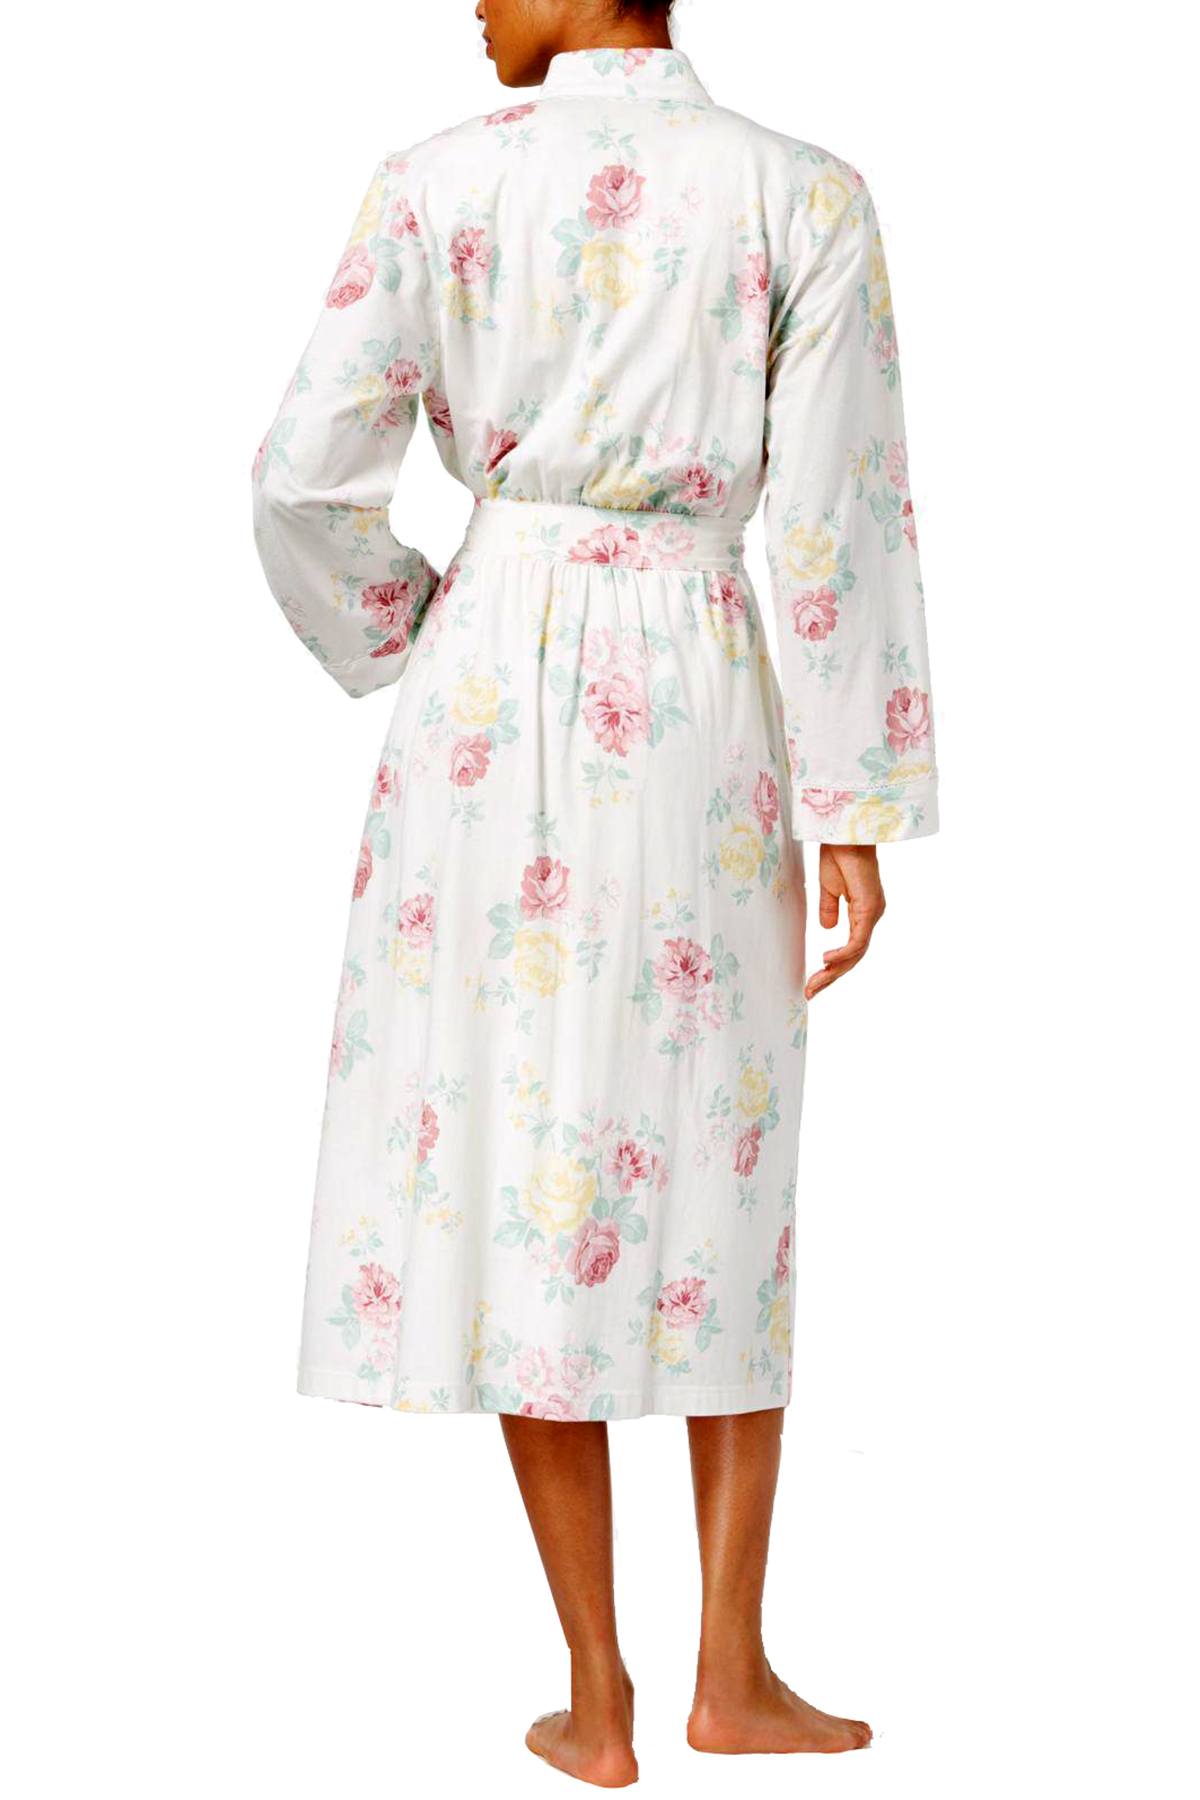 Charter Club Intimates White Floral-Print Lace-Trim Robe